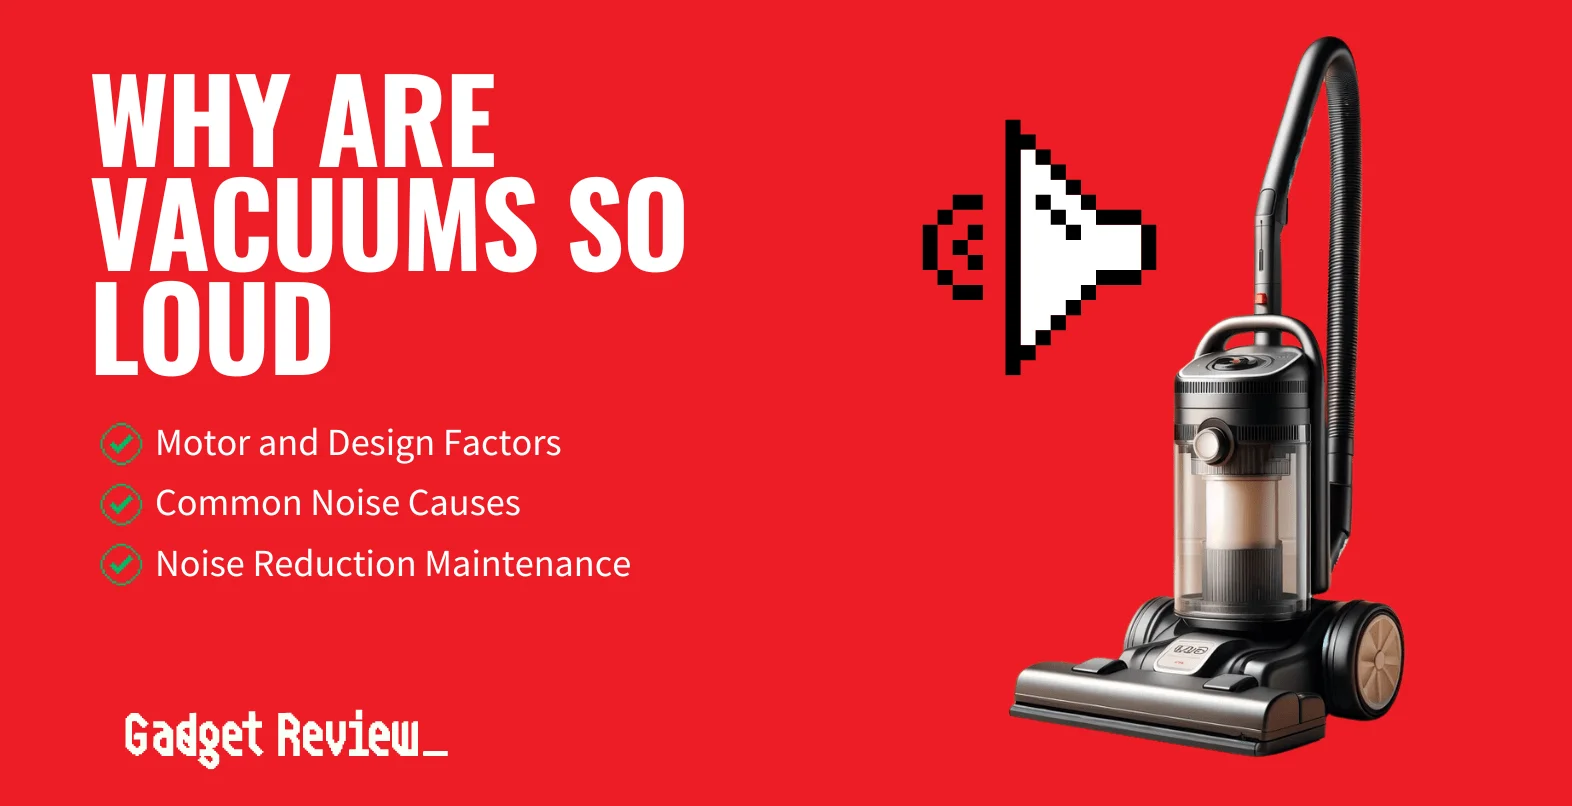 Why are Vacuums So Loud?